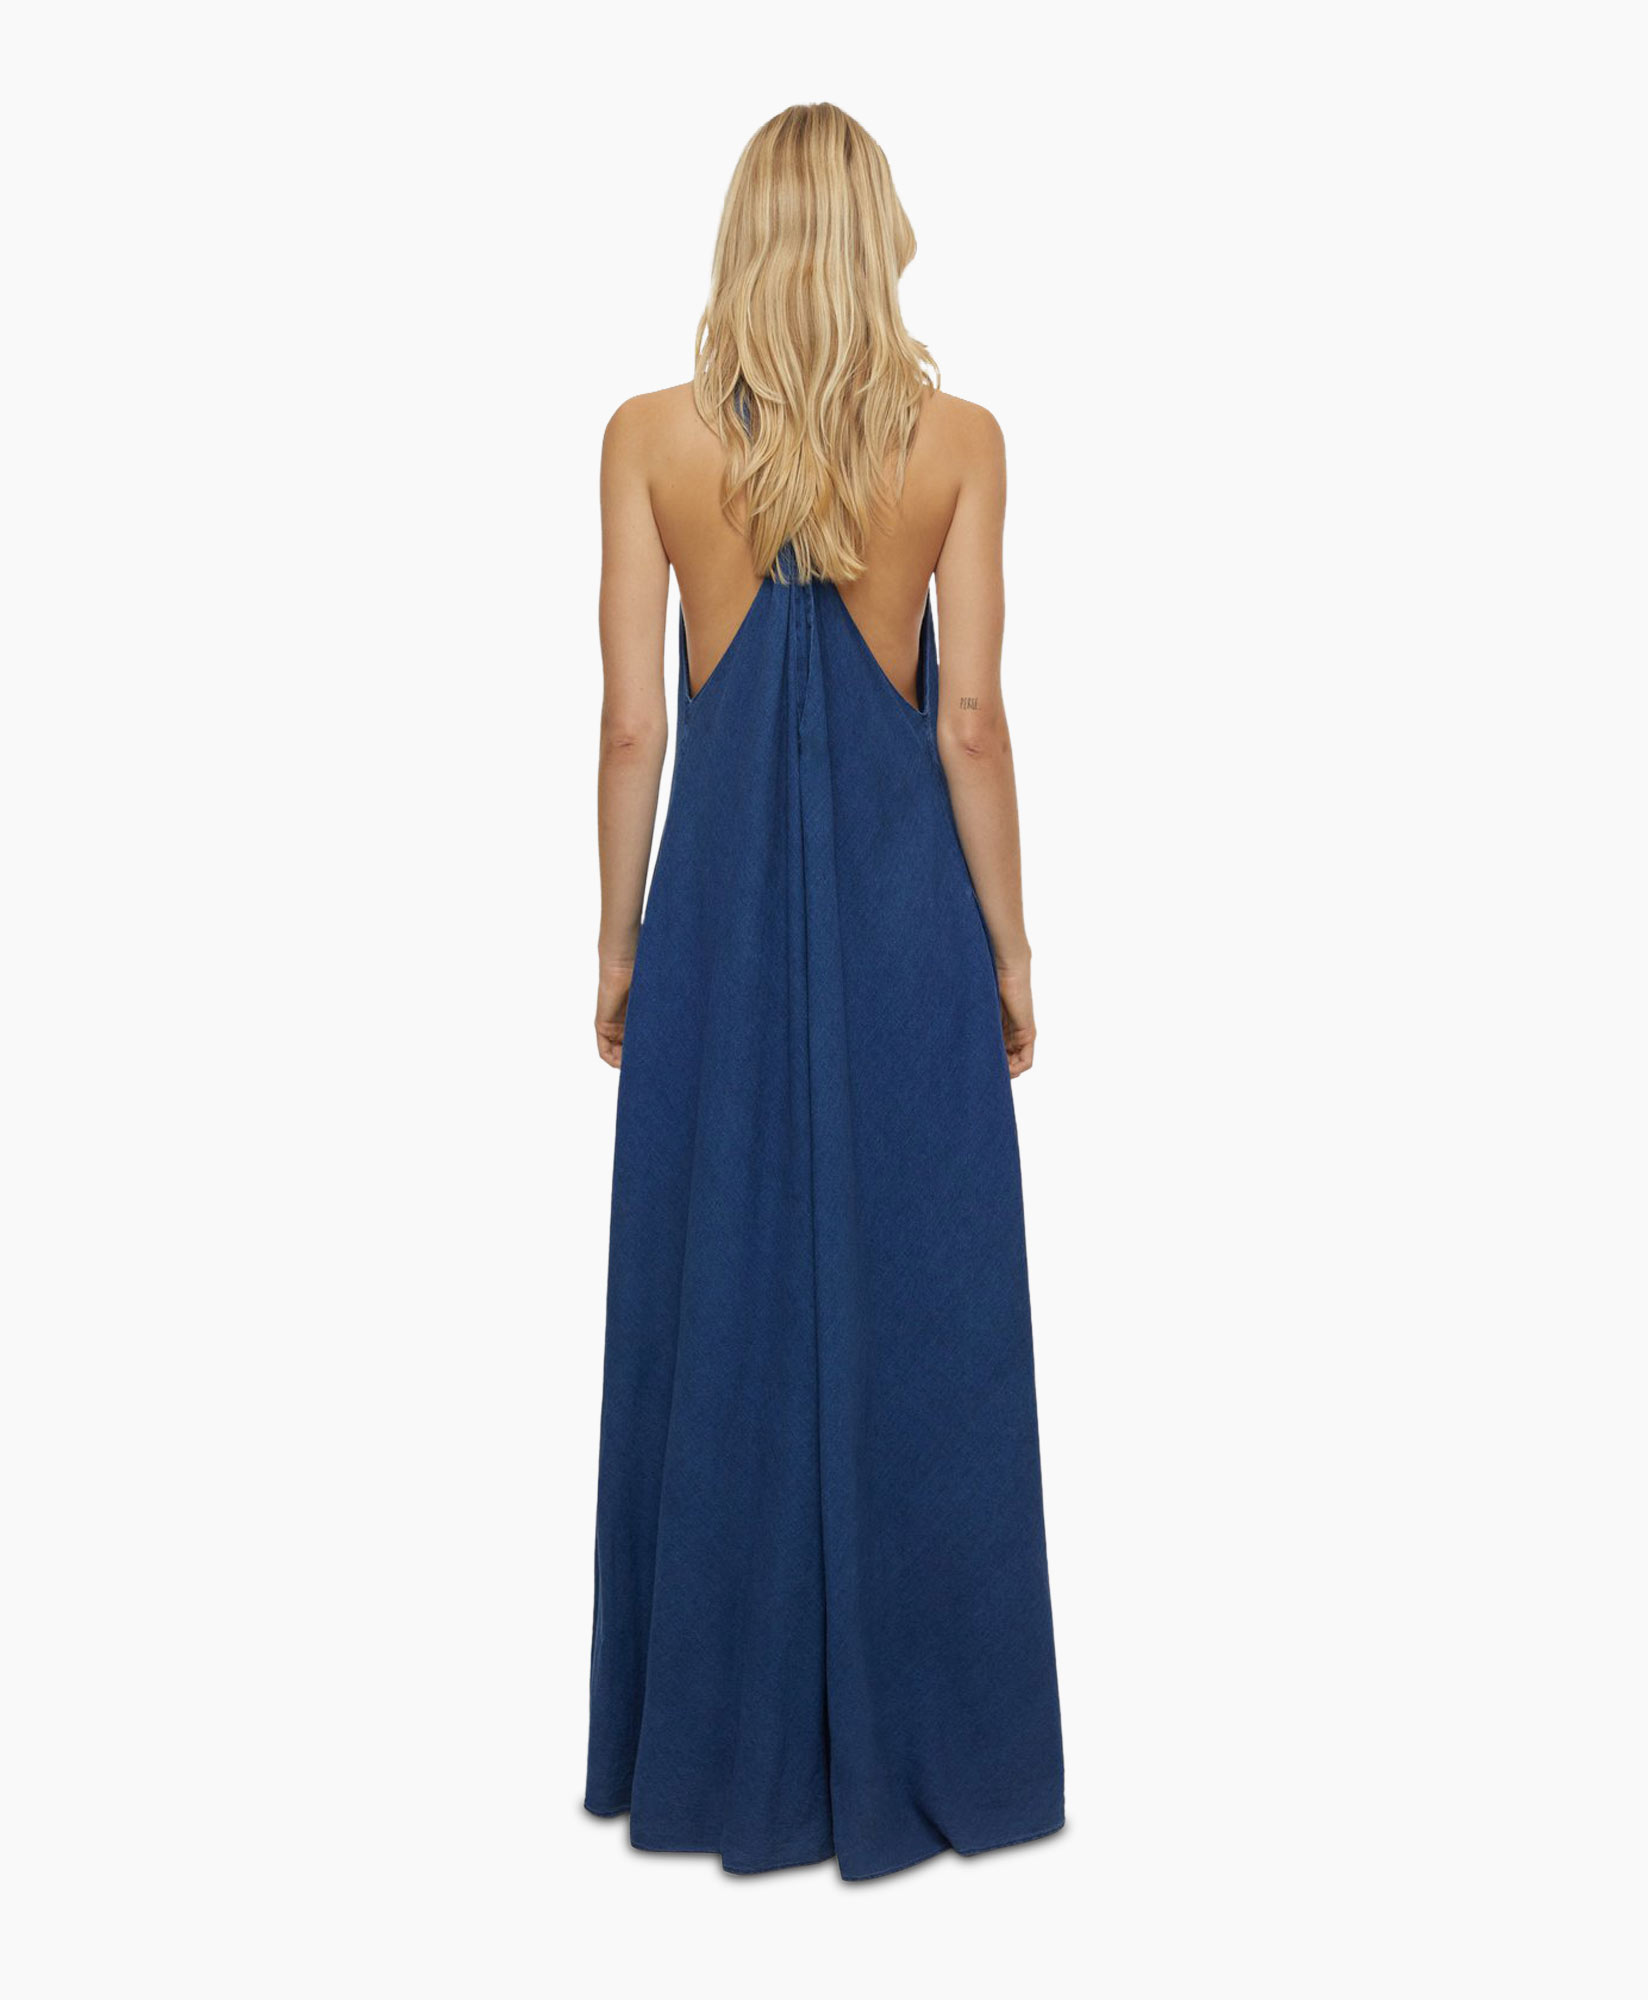 Maxi Jurk Maxi Knotted Straps Donker Blauw